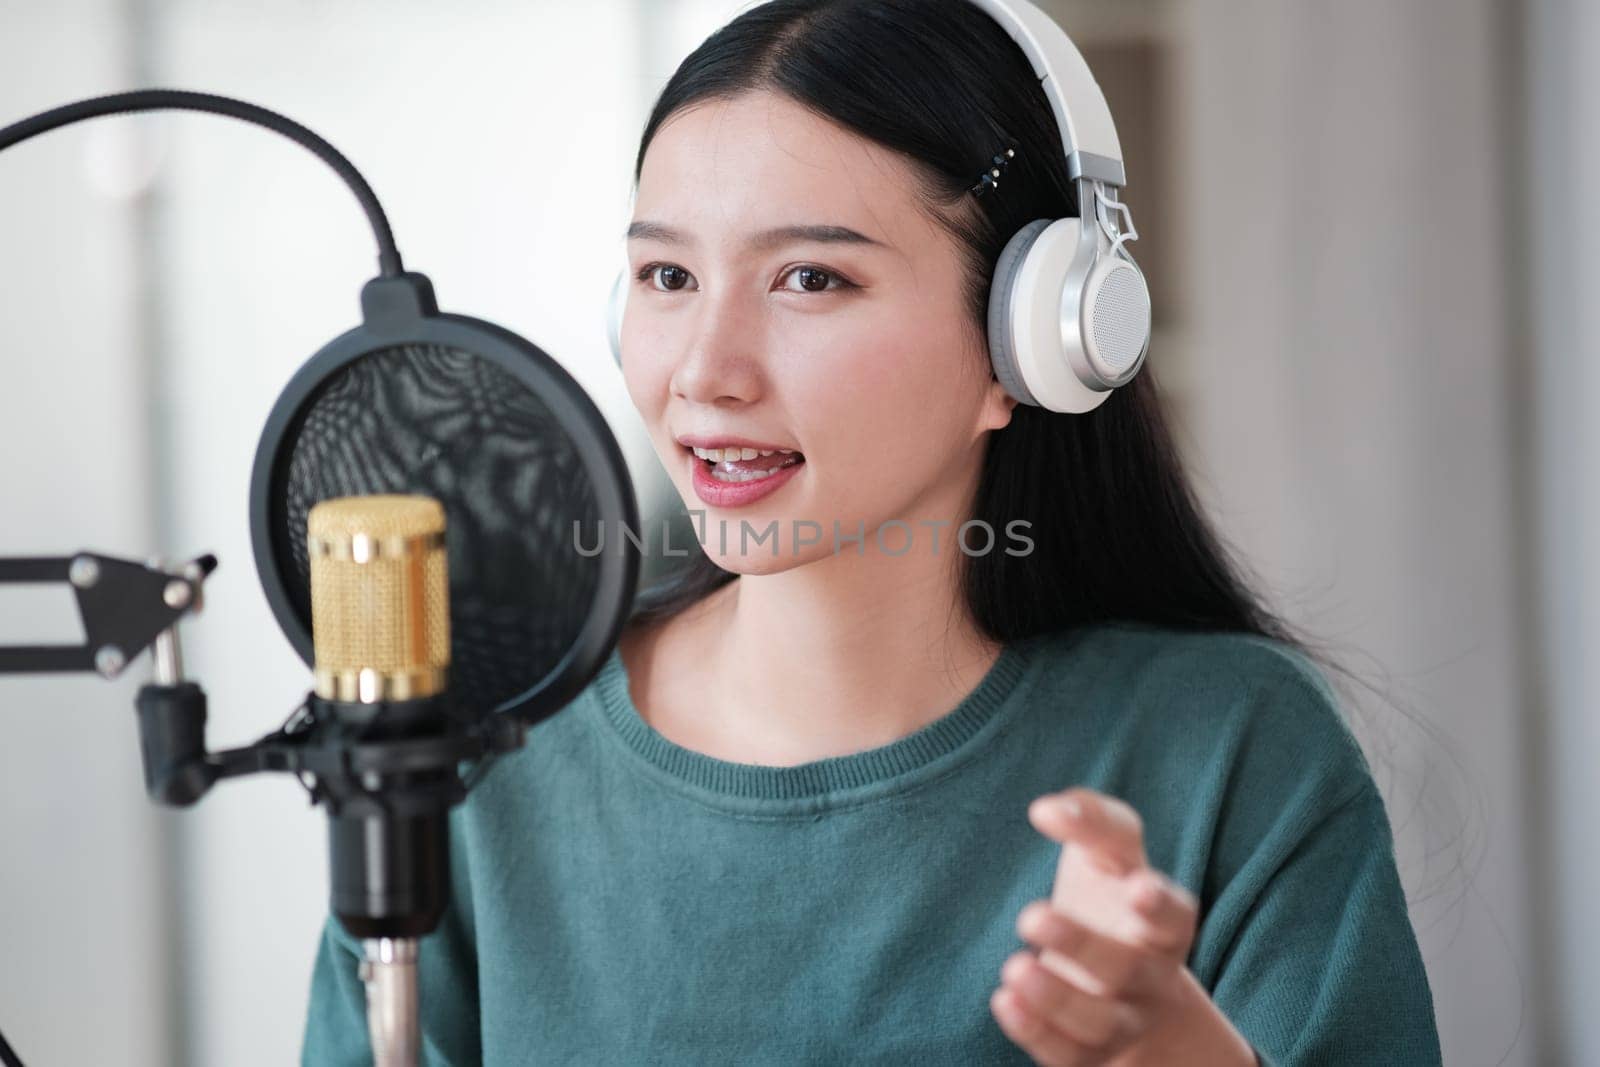 A woman is singing into a microphone. She is wearing headphones and has a microphone in front of her